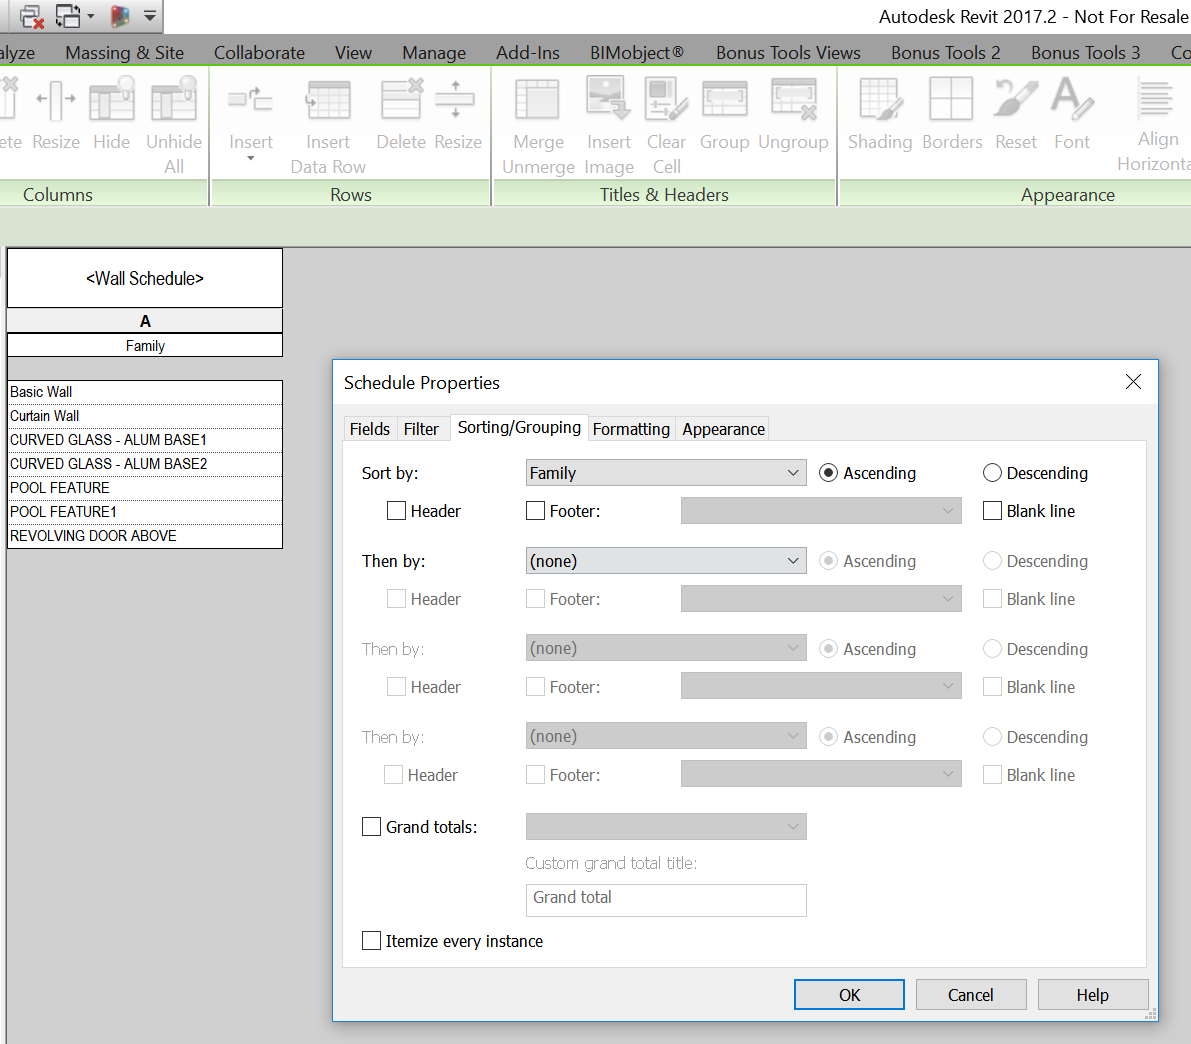 How To Select All Types of All Curtain Walls at Once in Revit